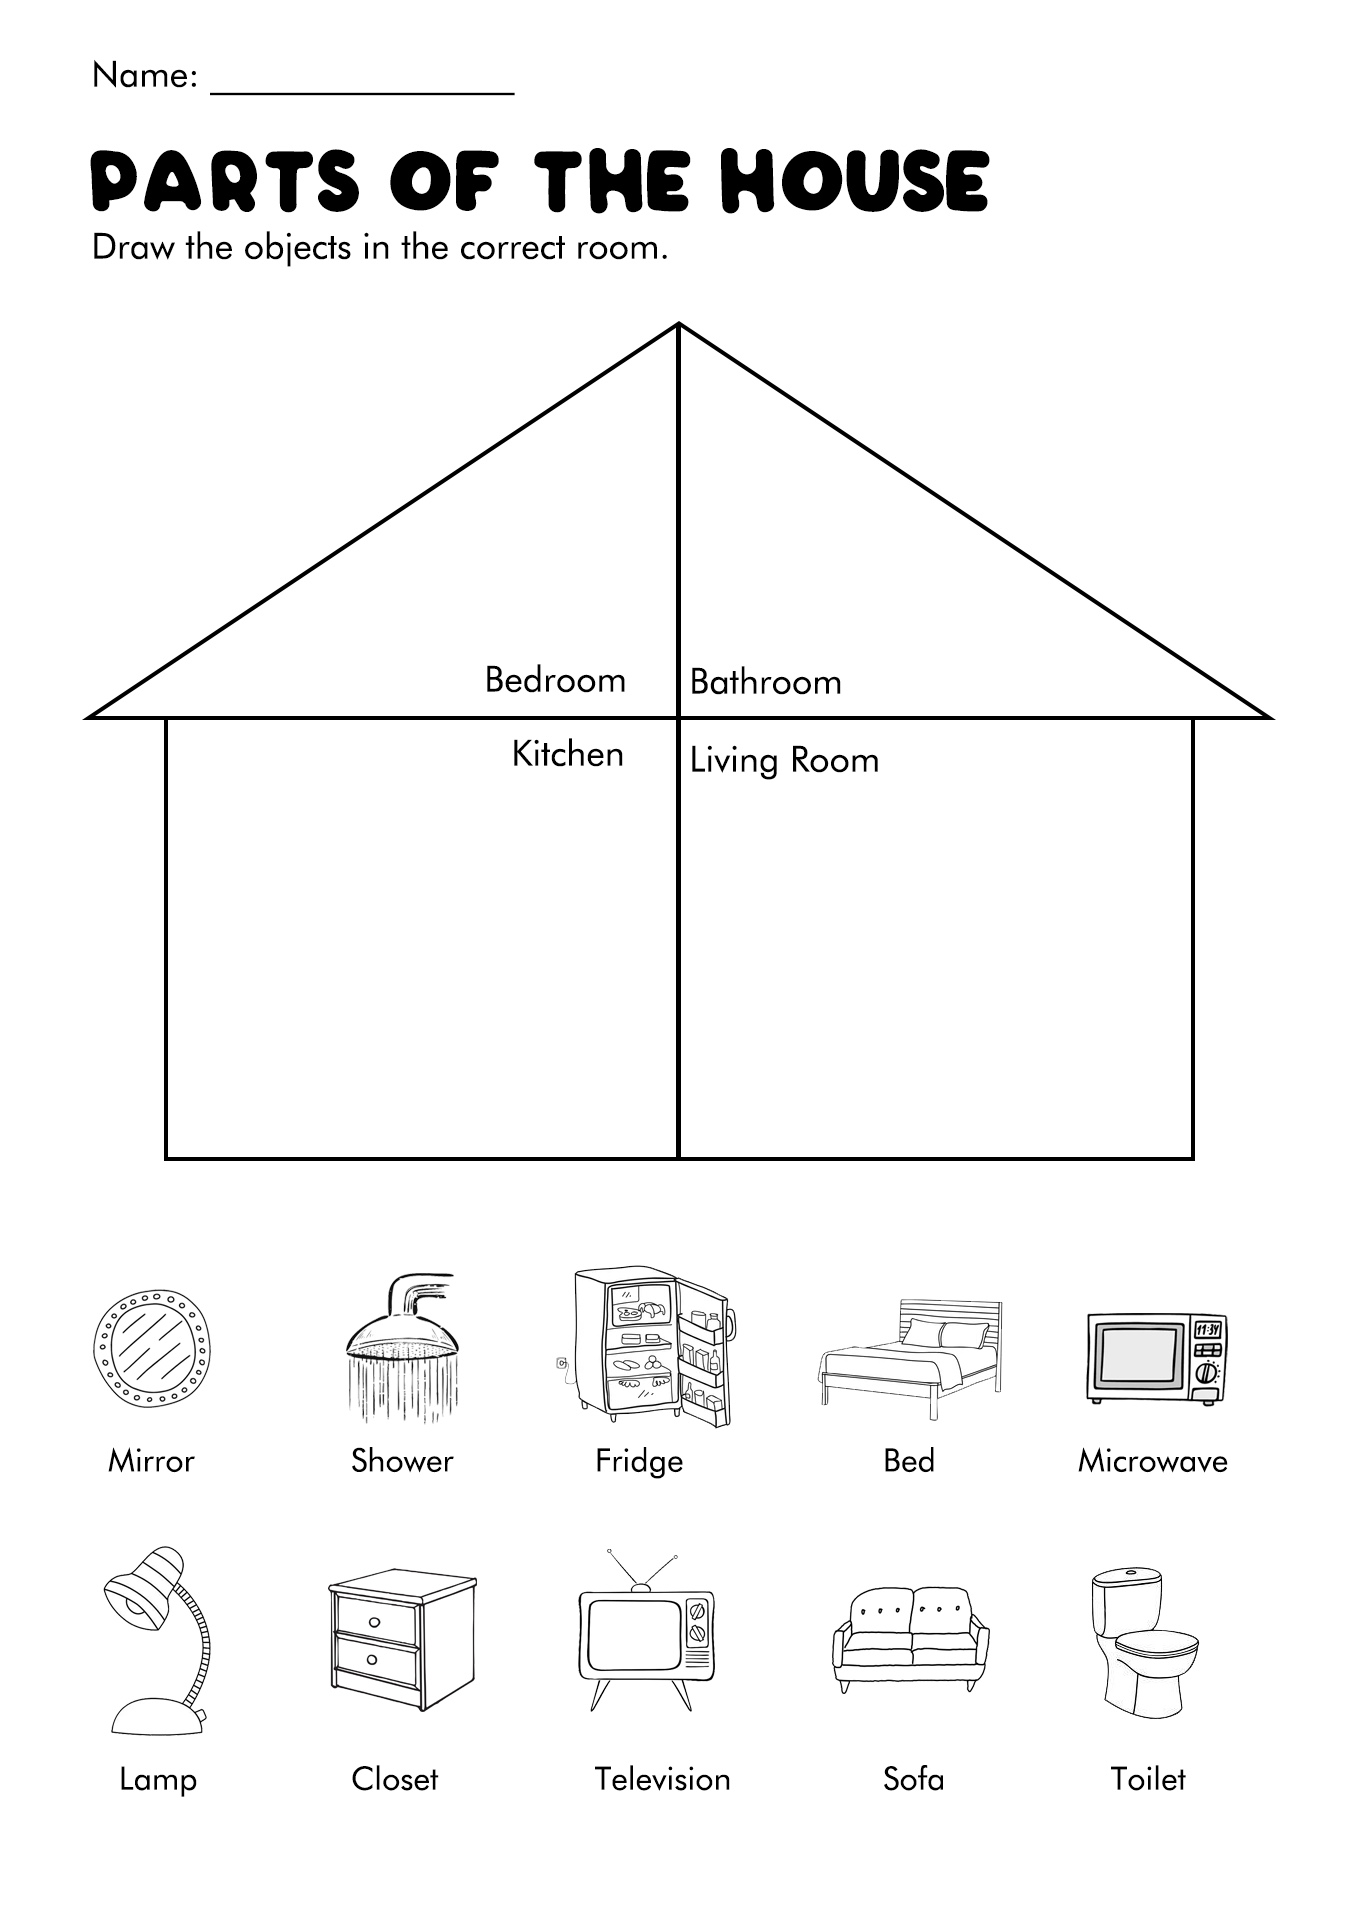 Parts of the House ESL Worksheets